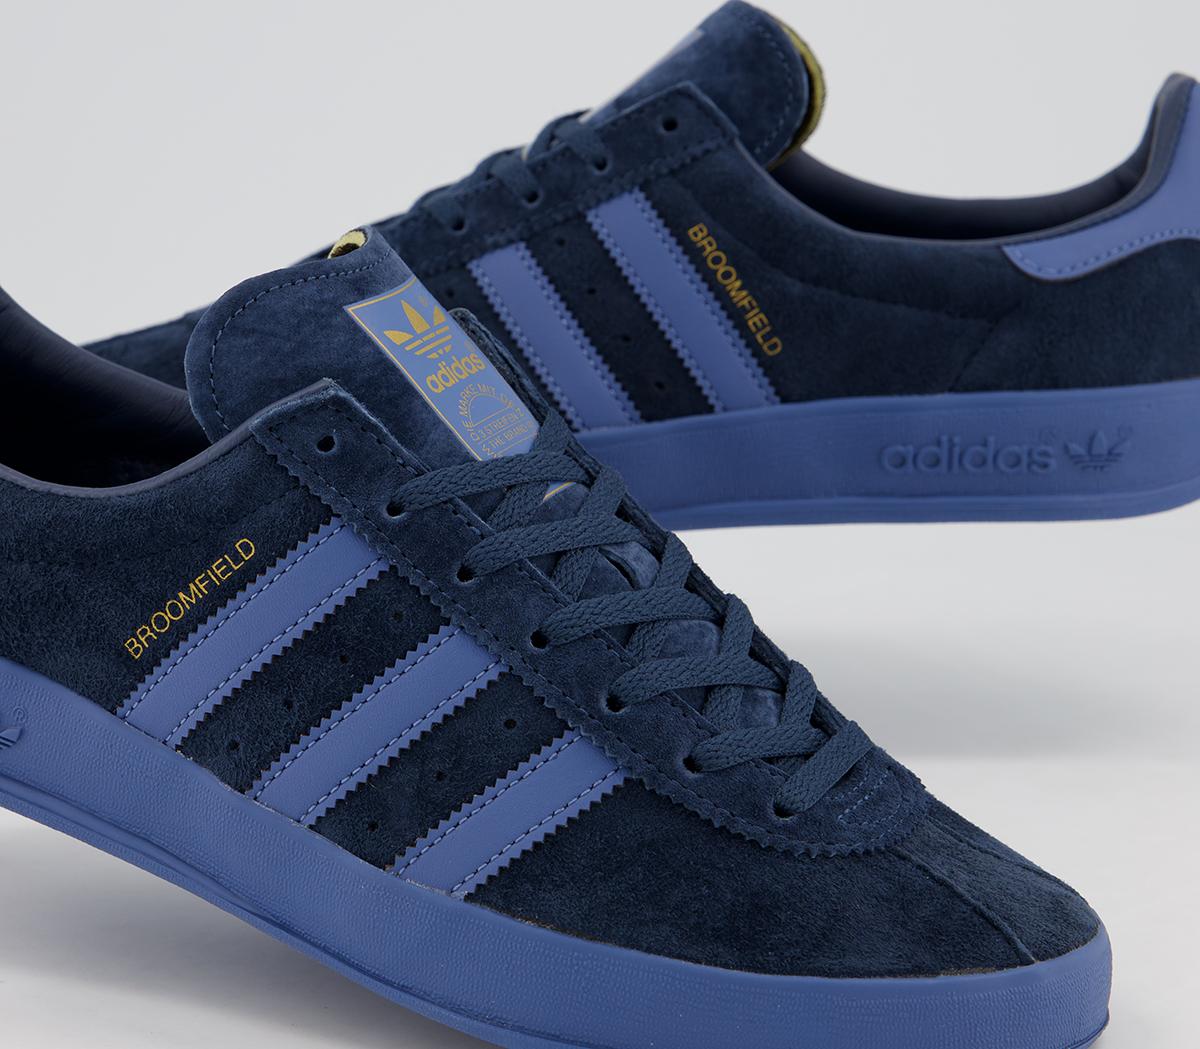 Adidas Broomfield Trainers Blue Gold Metallic His Trainers 1641